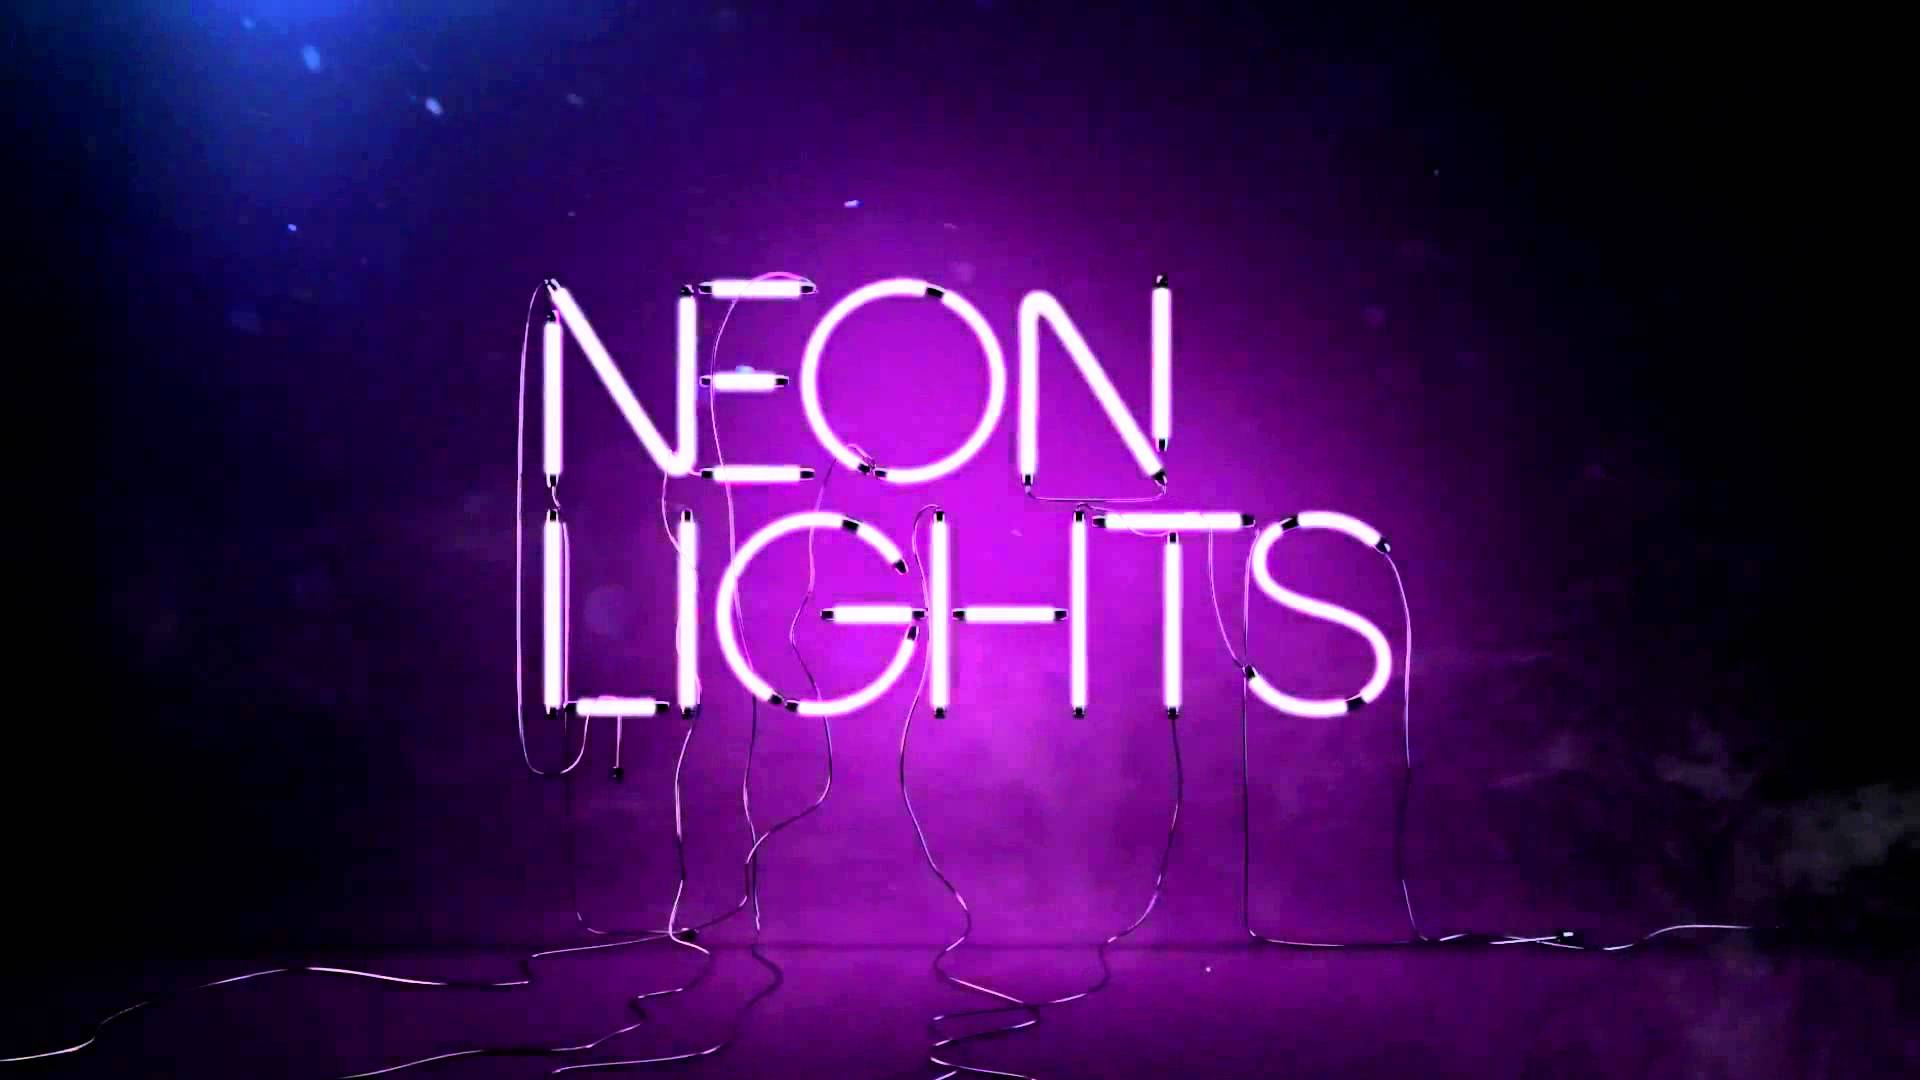 Neon Lights, HD Creative, 4k Wallpapers, Image, Backgrounds, Photos